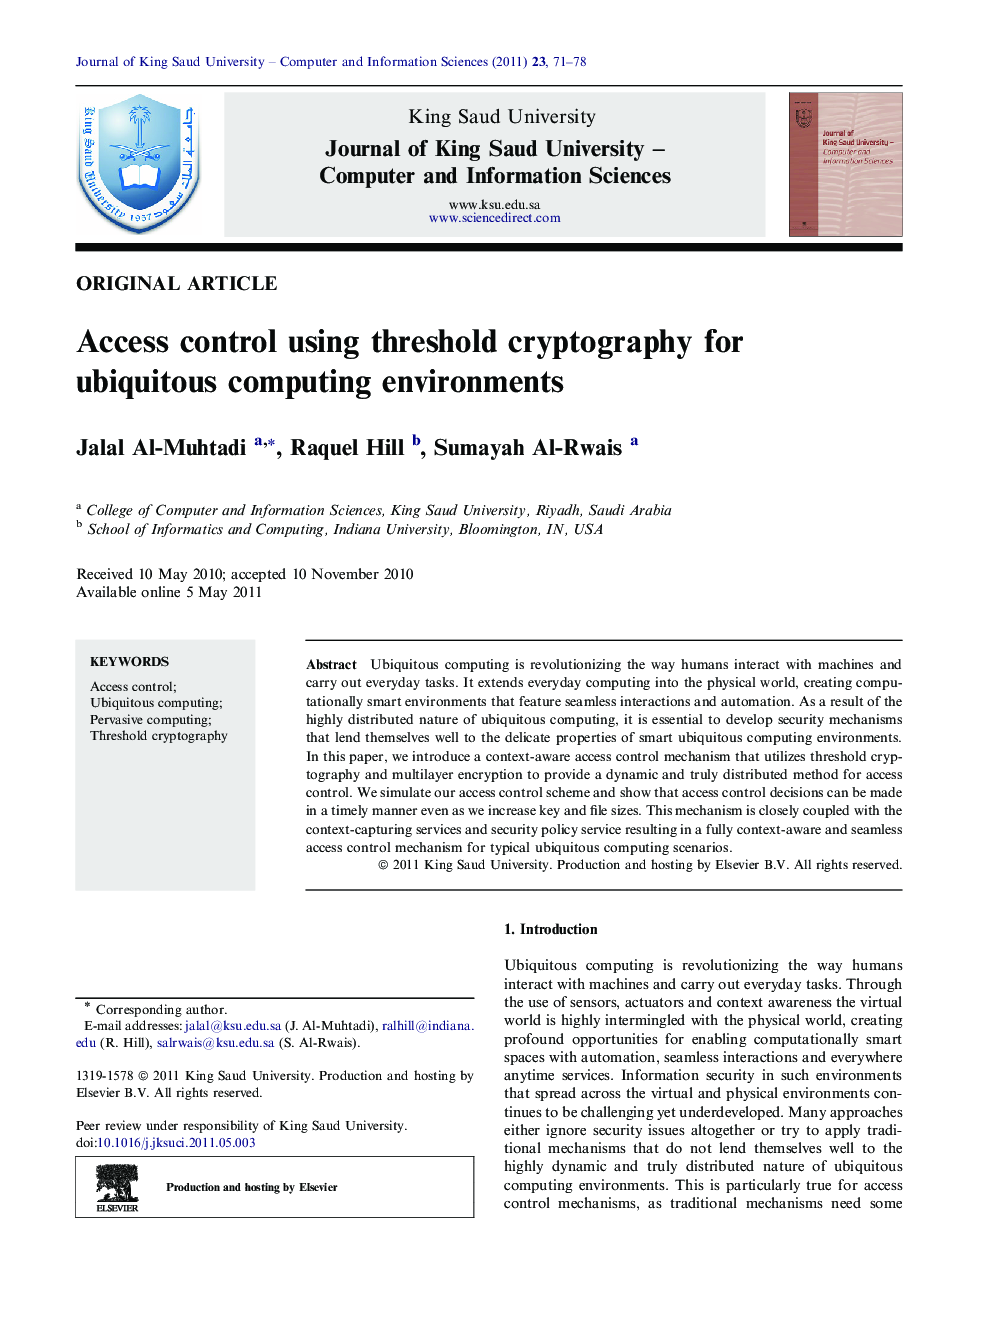 Access control using threshold cryptography for ubiquitous computing environments